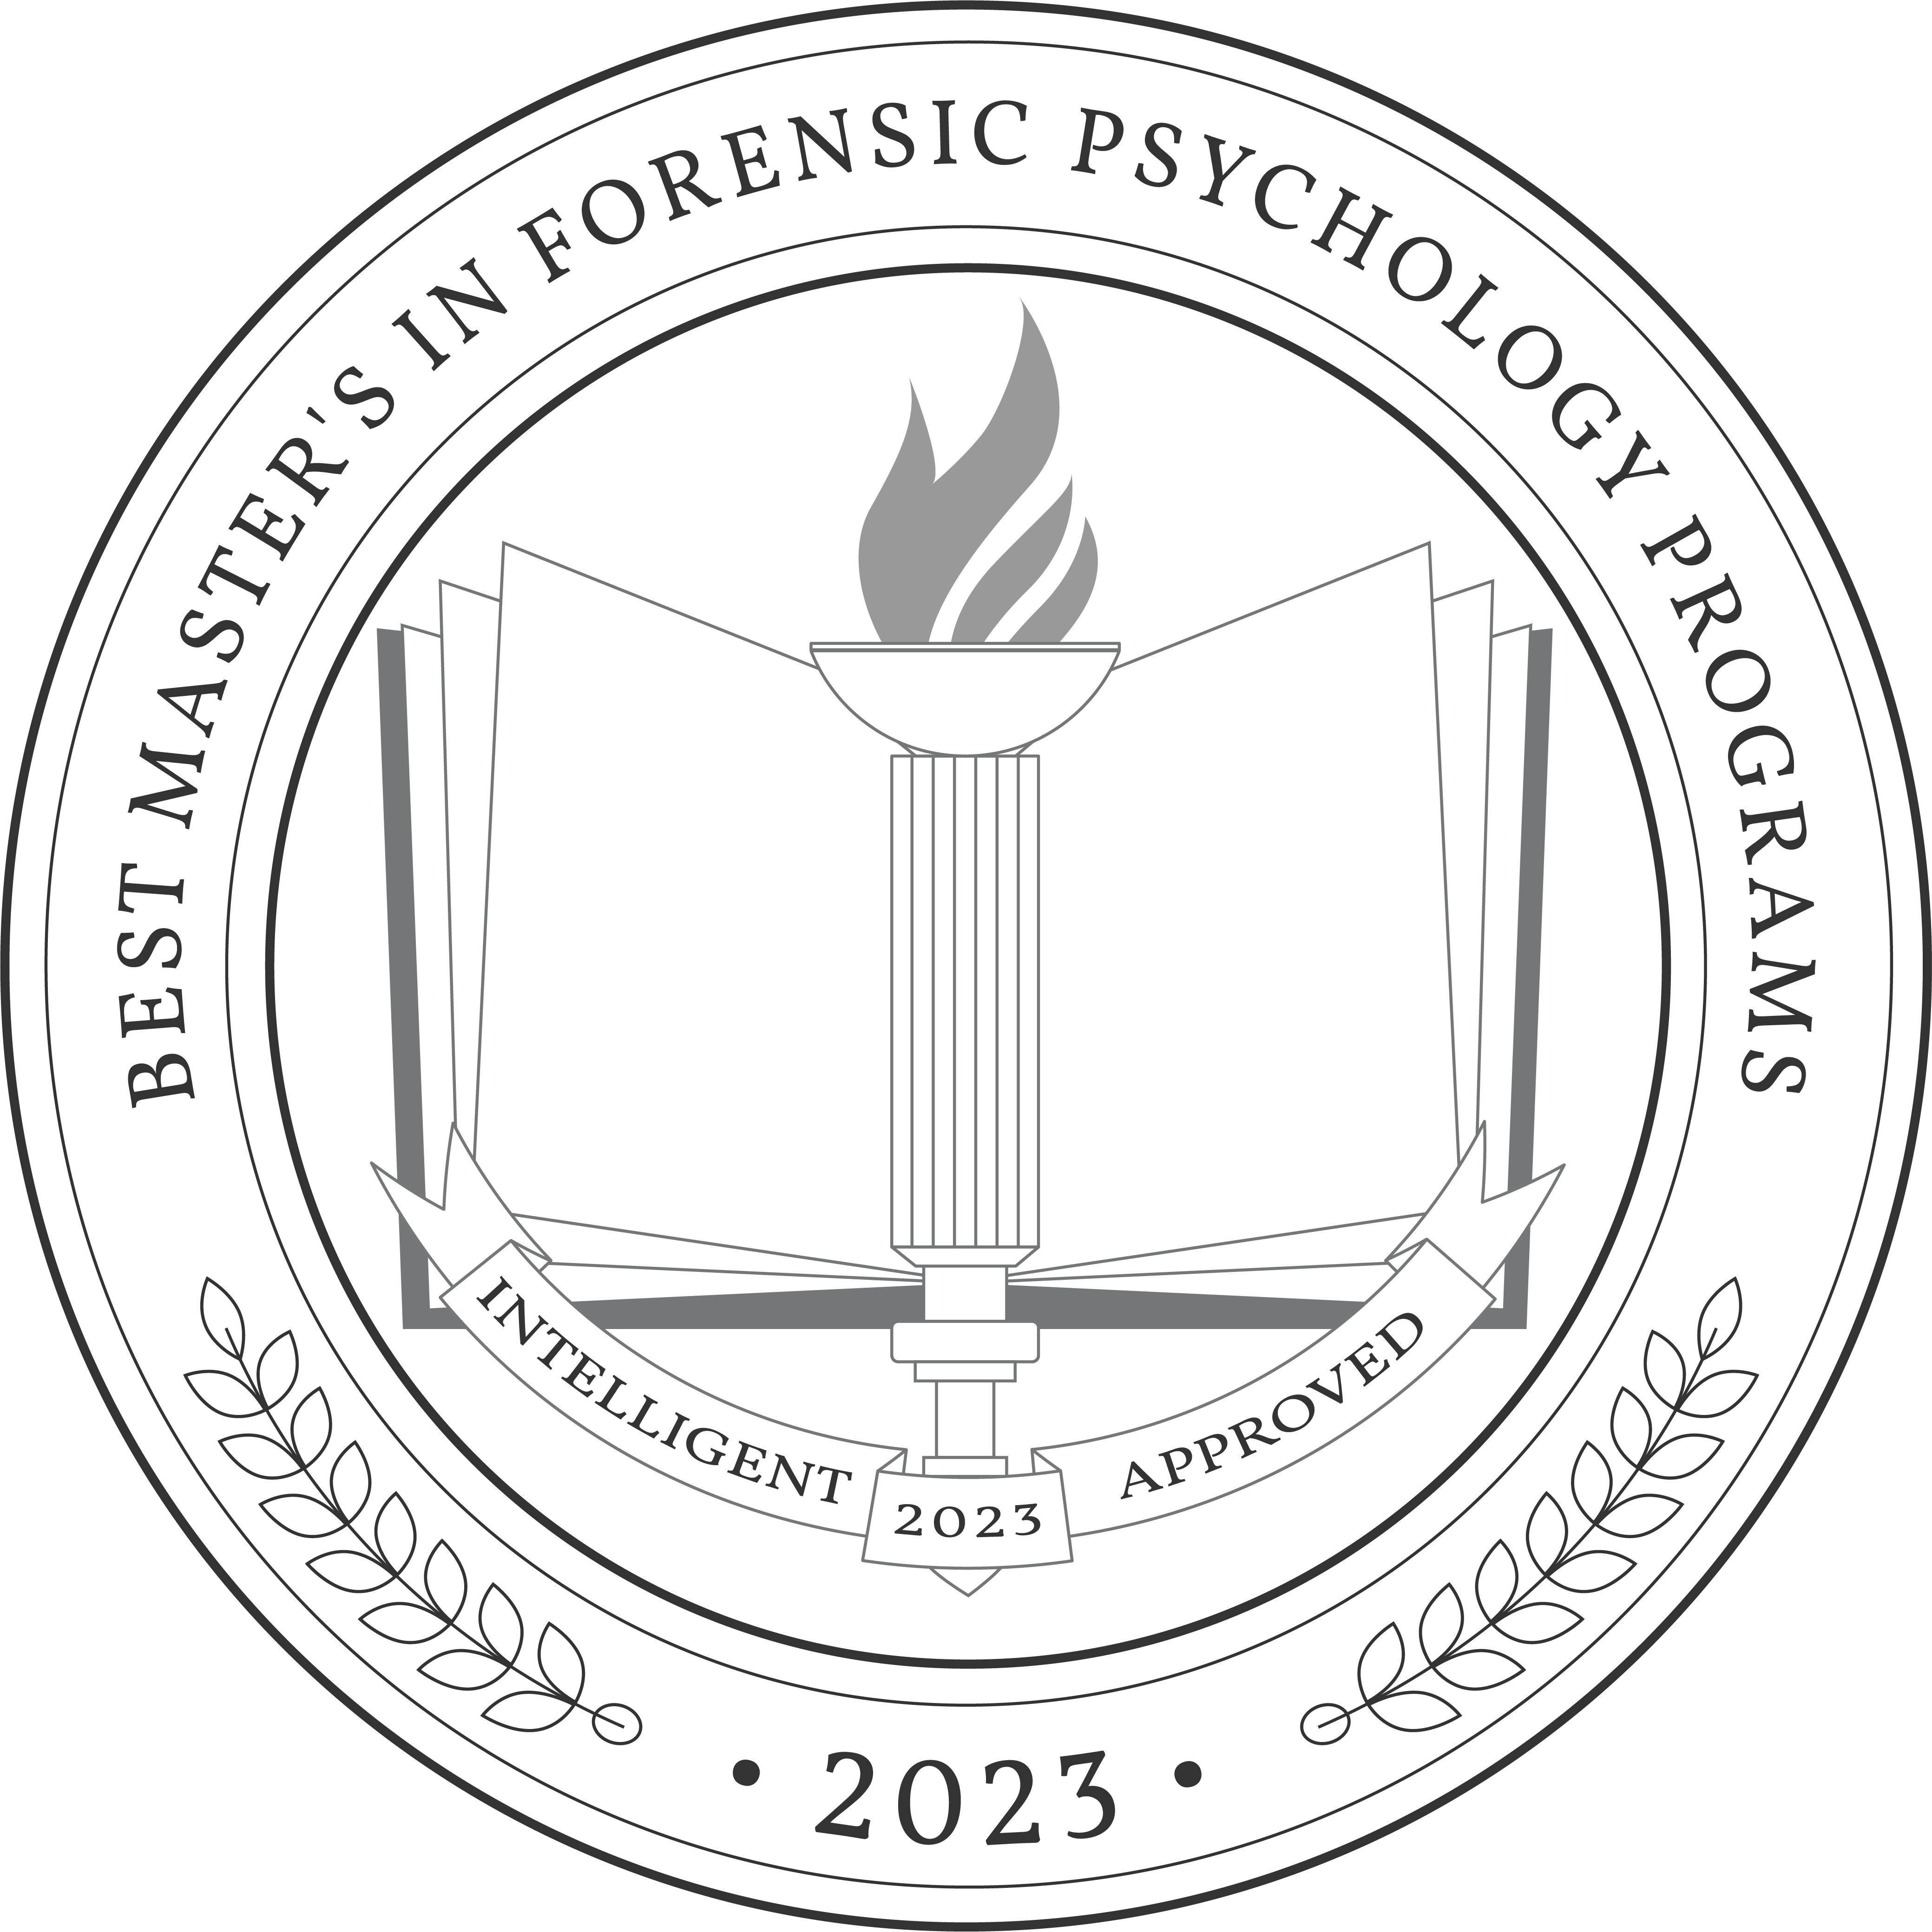 Best Master's in Forensic Psychology Programs 2023